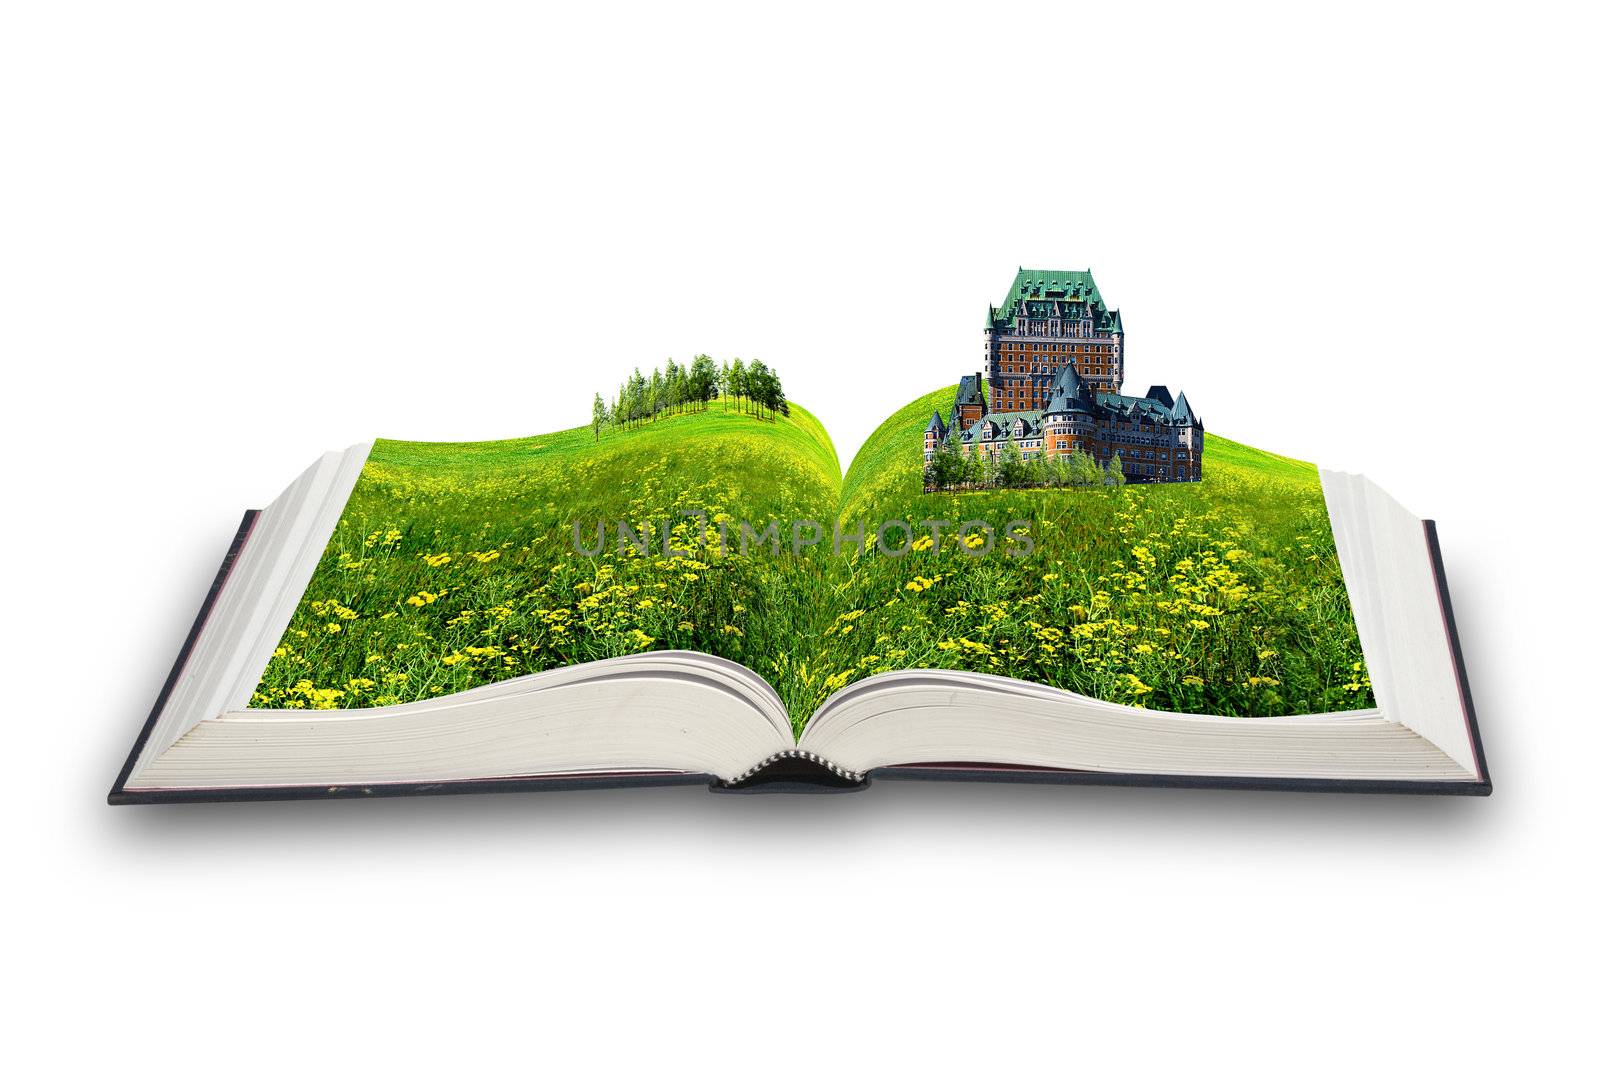 The open magic book. The castle in the book